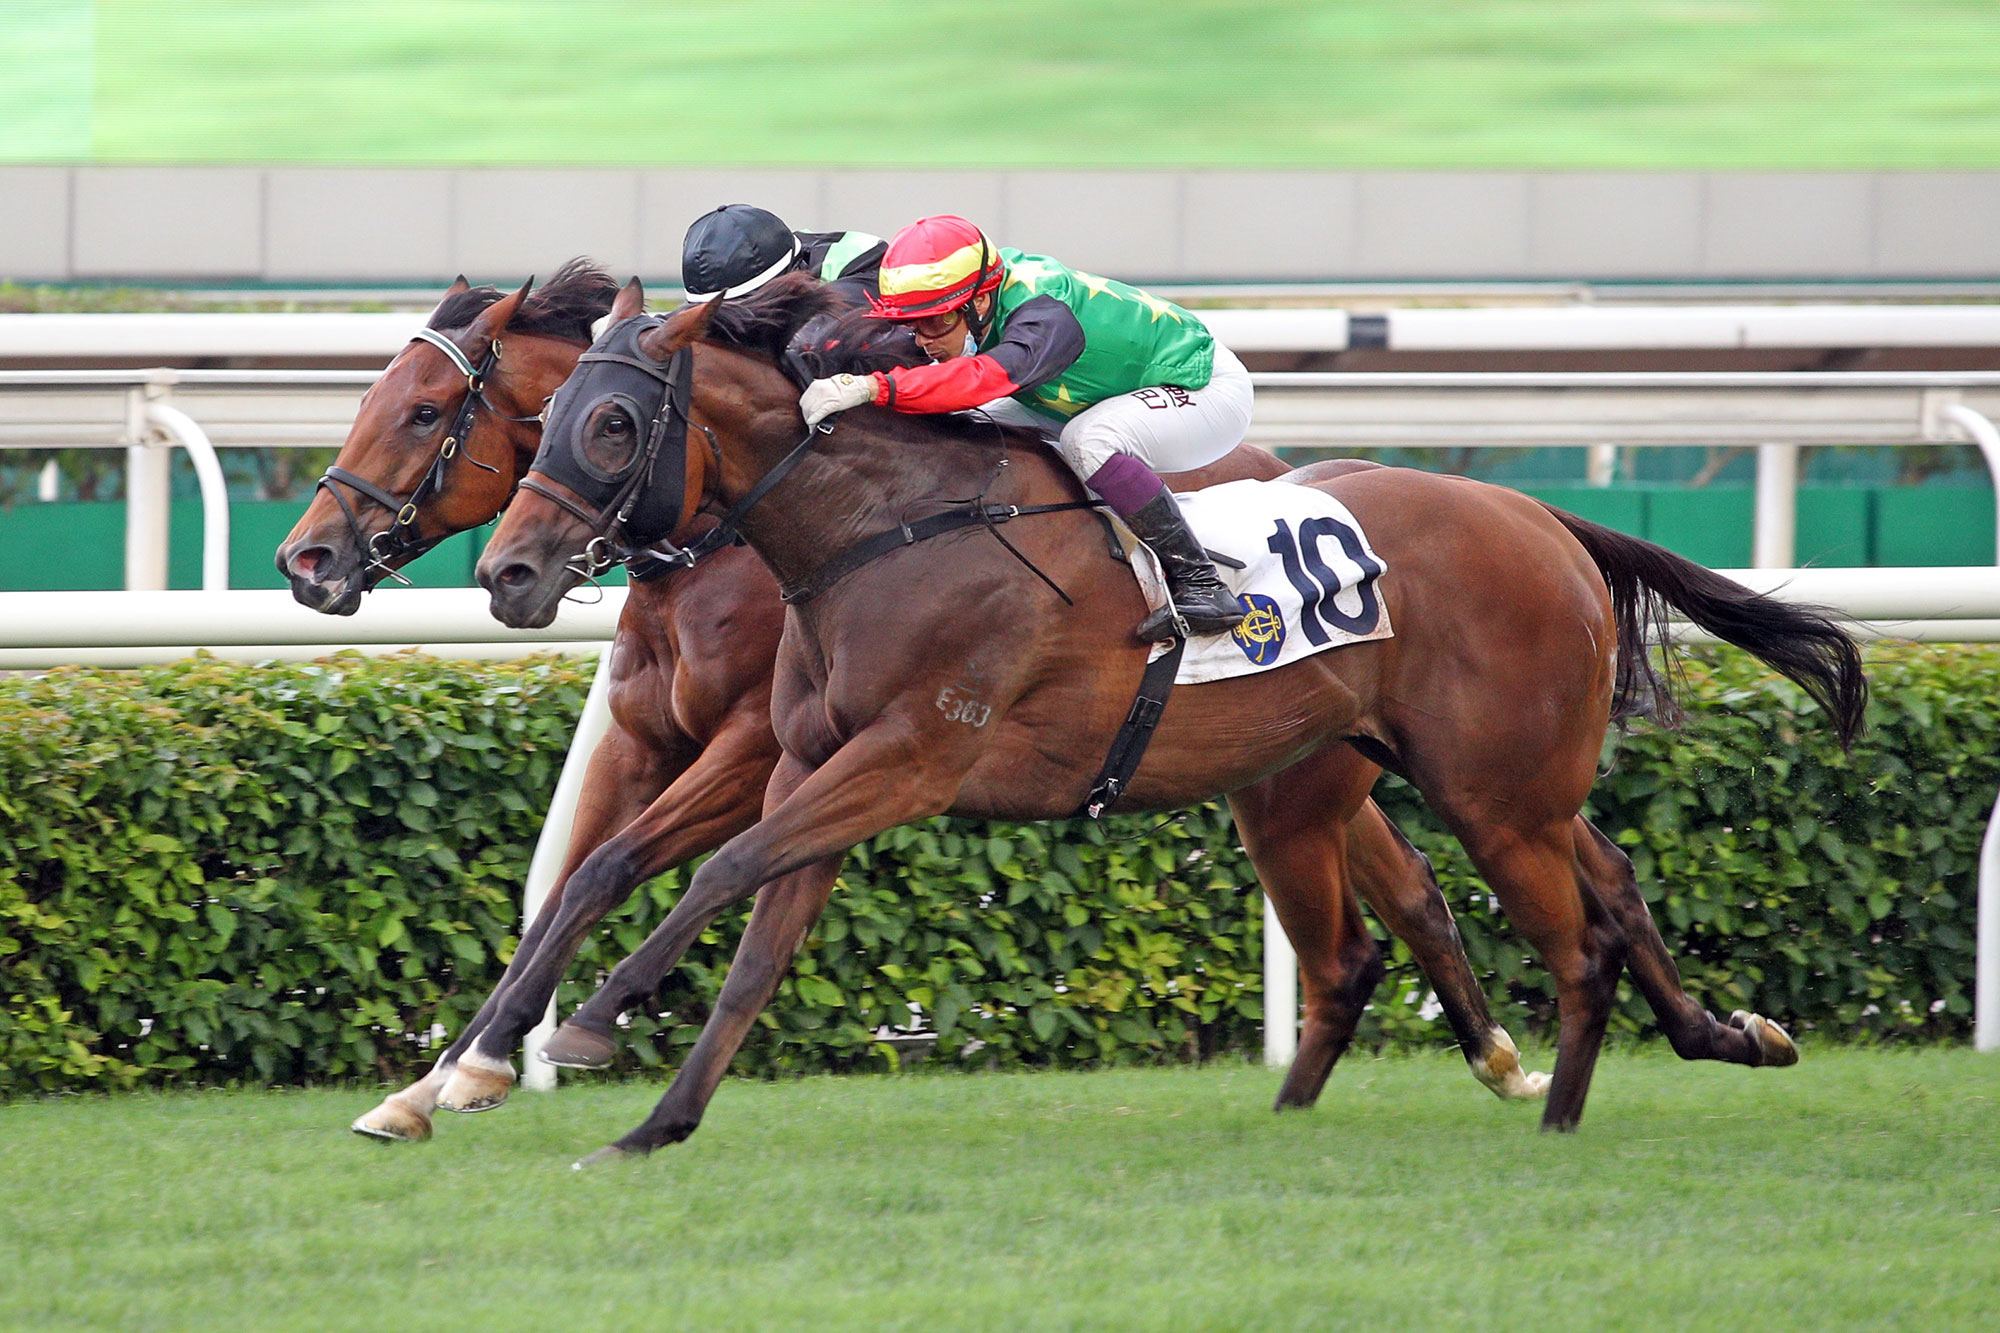 The Richard Gibson-trained Cordyceps Six takes the G3 Sha Tin Vase Handicap (1200m) under Alexis Badel at Sha Tin Racecourse today.